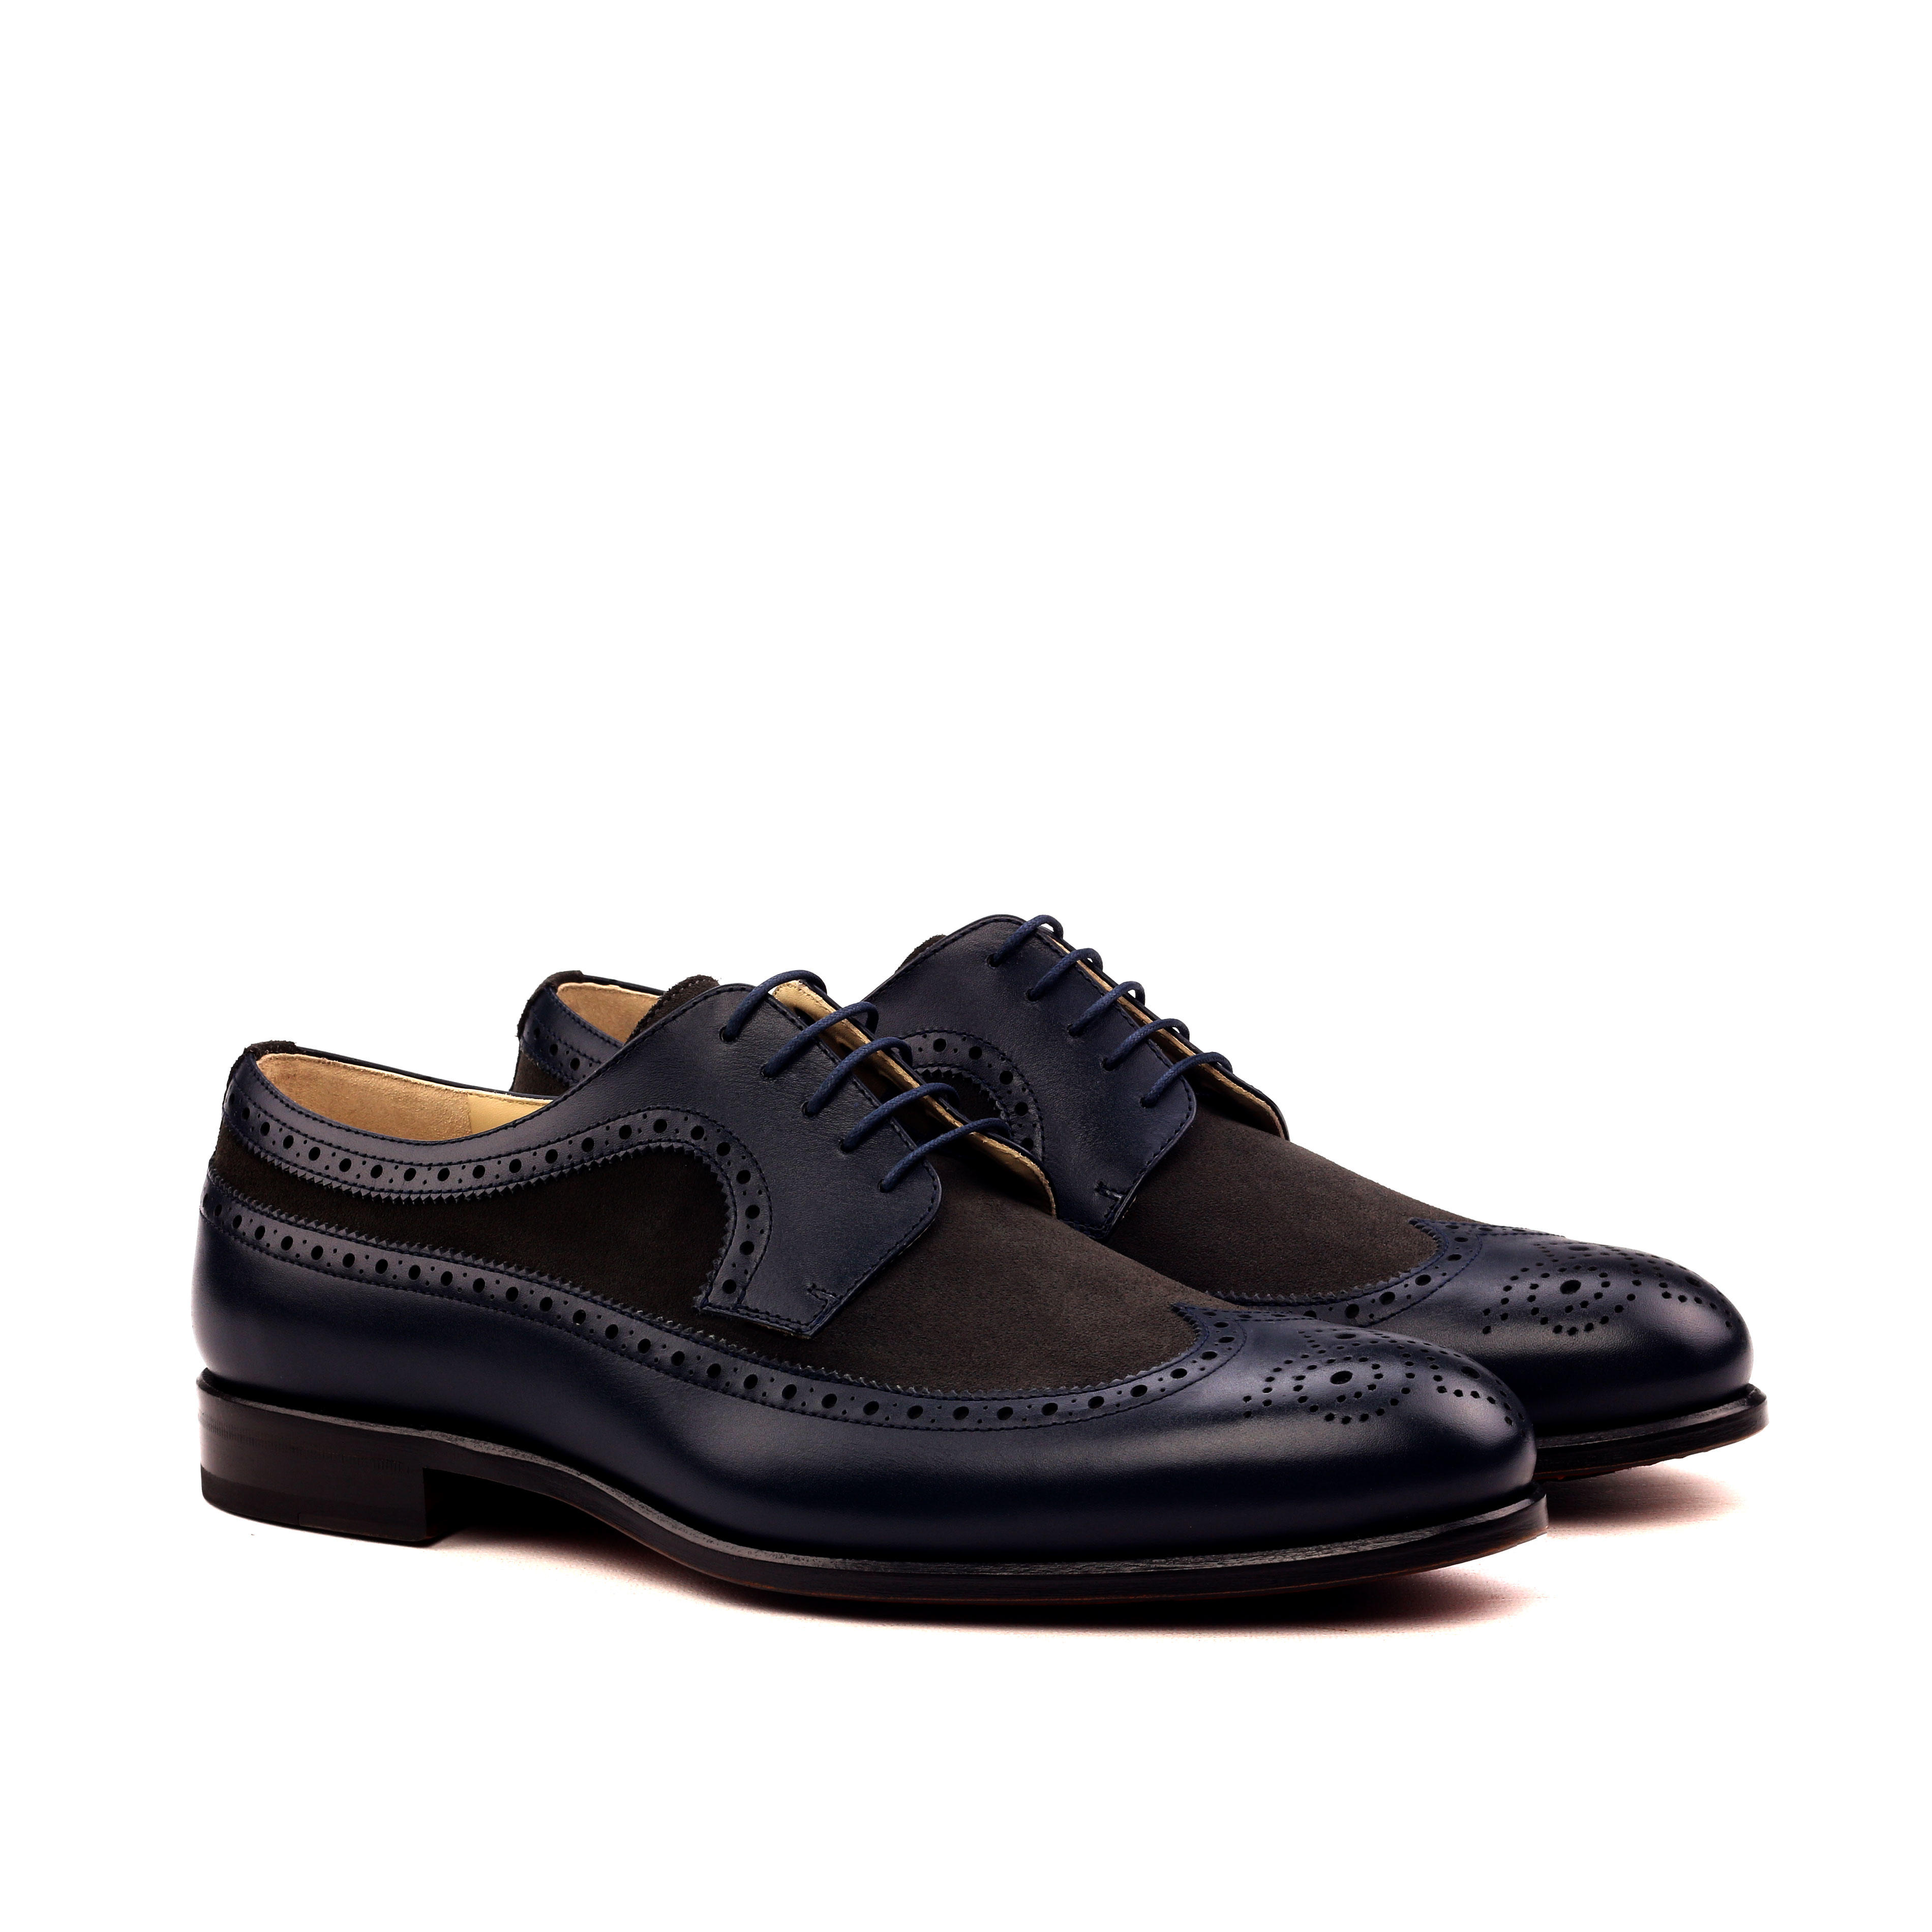 Manor of London 'The Blucher' Navy Calfskin & Grey Suede Shoe Luxury Lace Up Custom Initials Front Side View